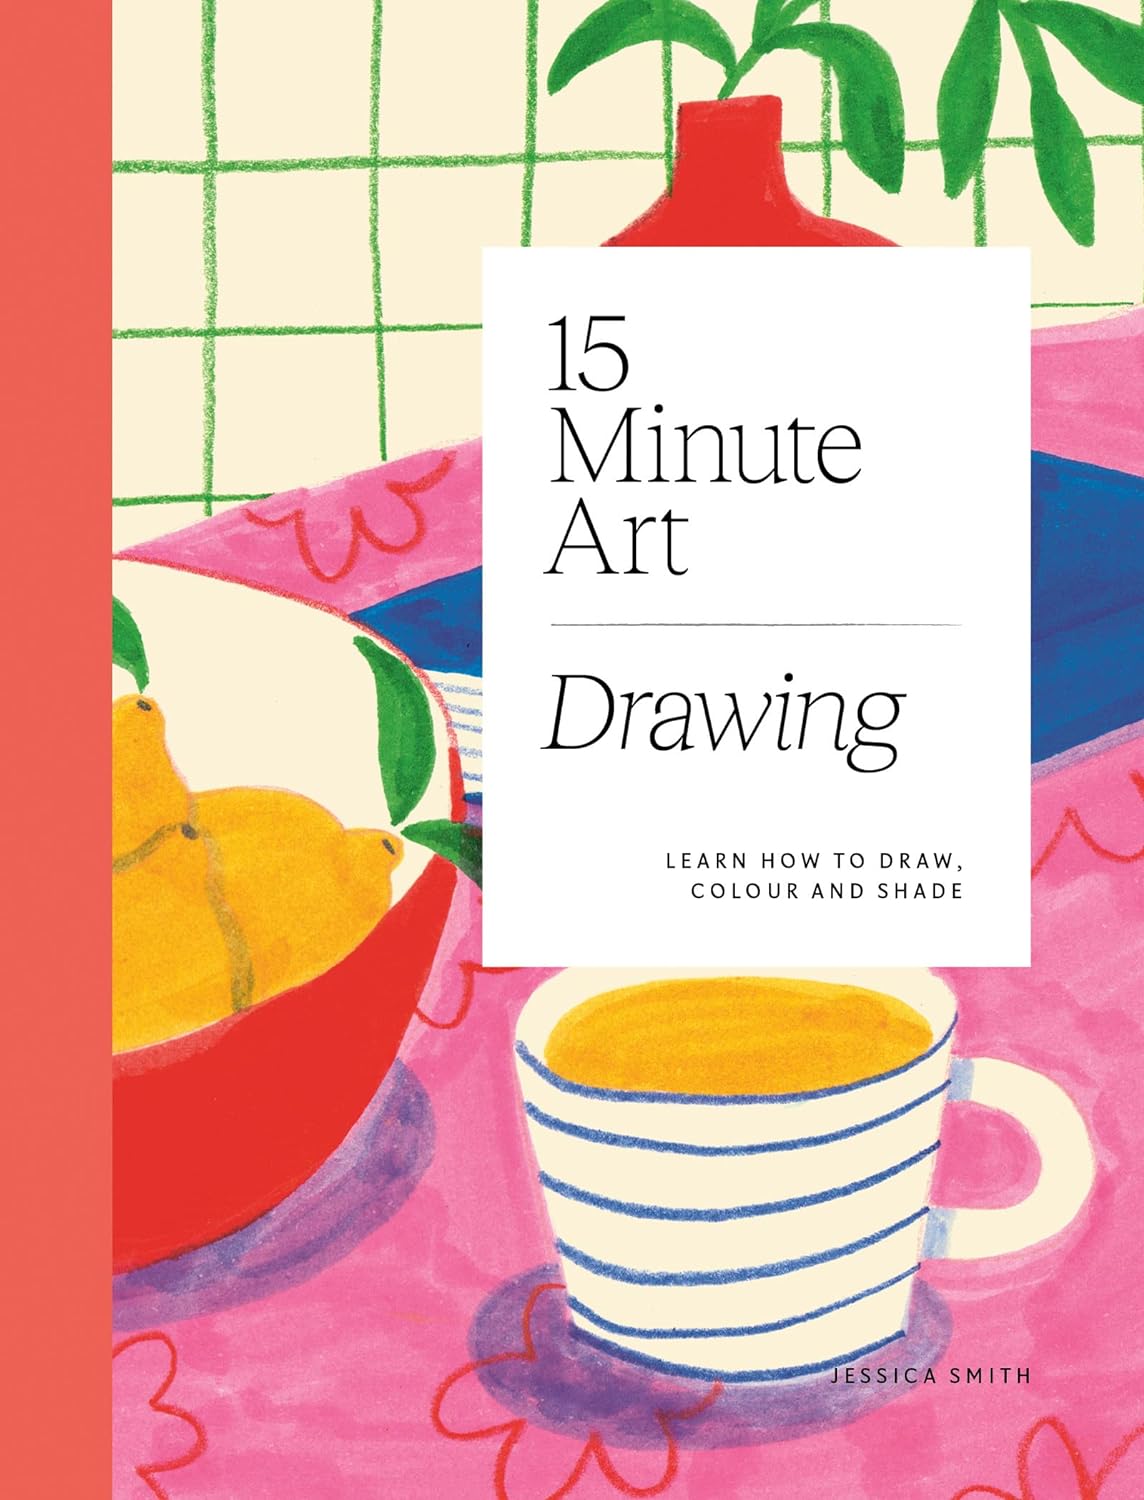 jessica-smith-illustration-15-minute-art-drawing-book